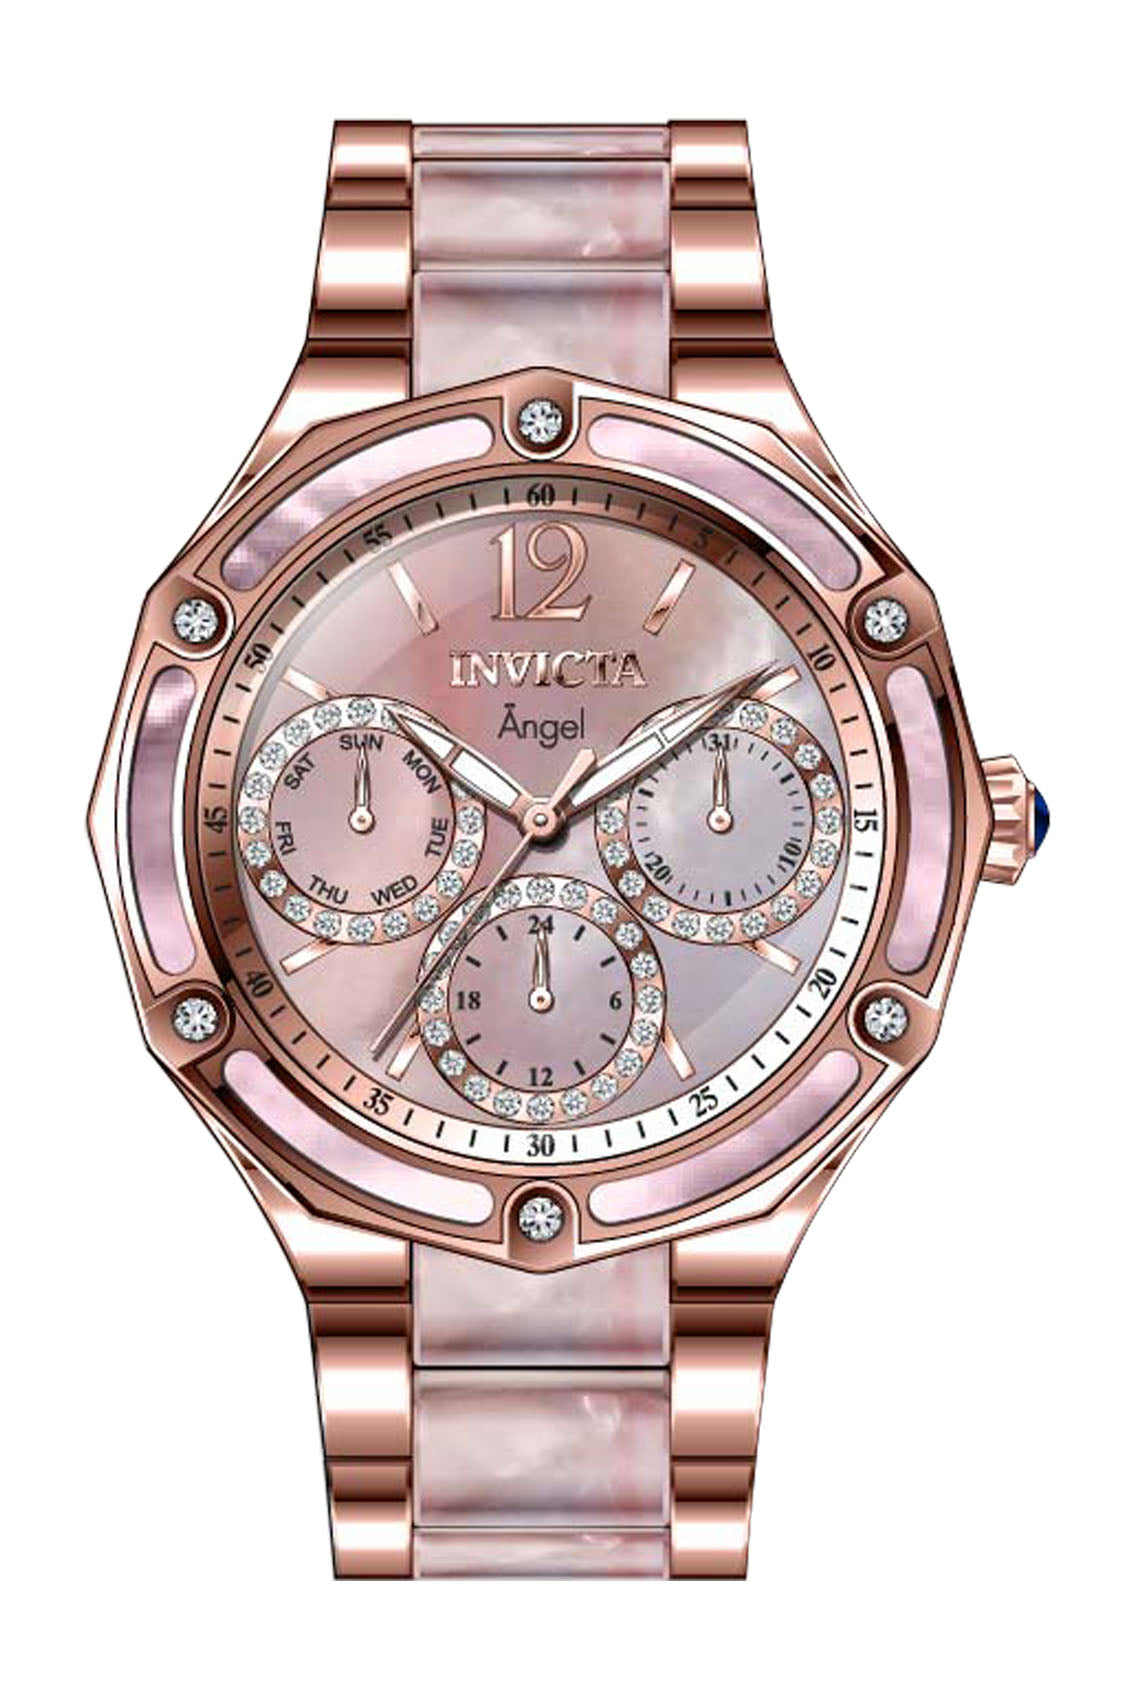 Band for Invicta Angel Lady 40394